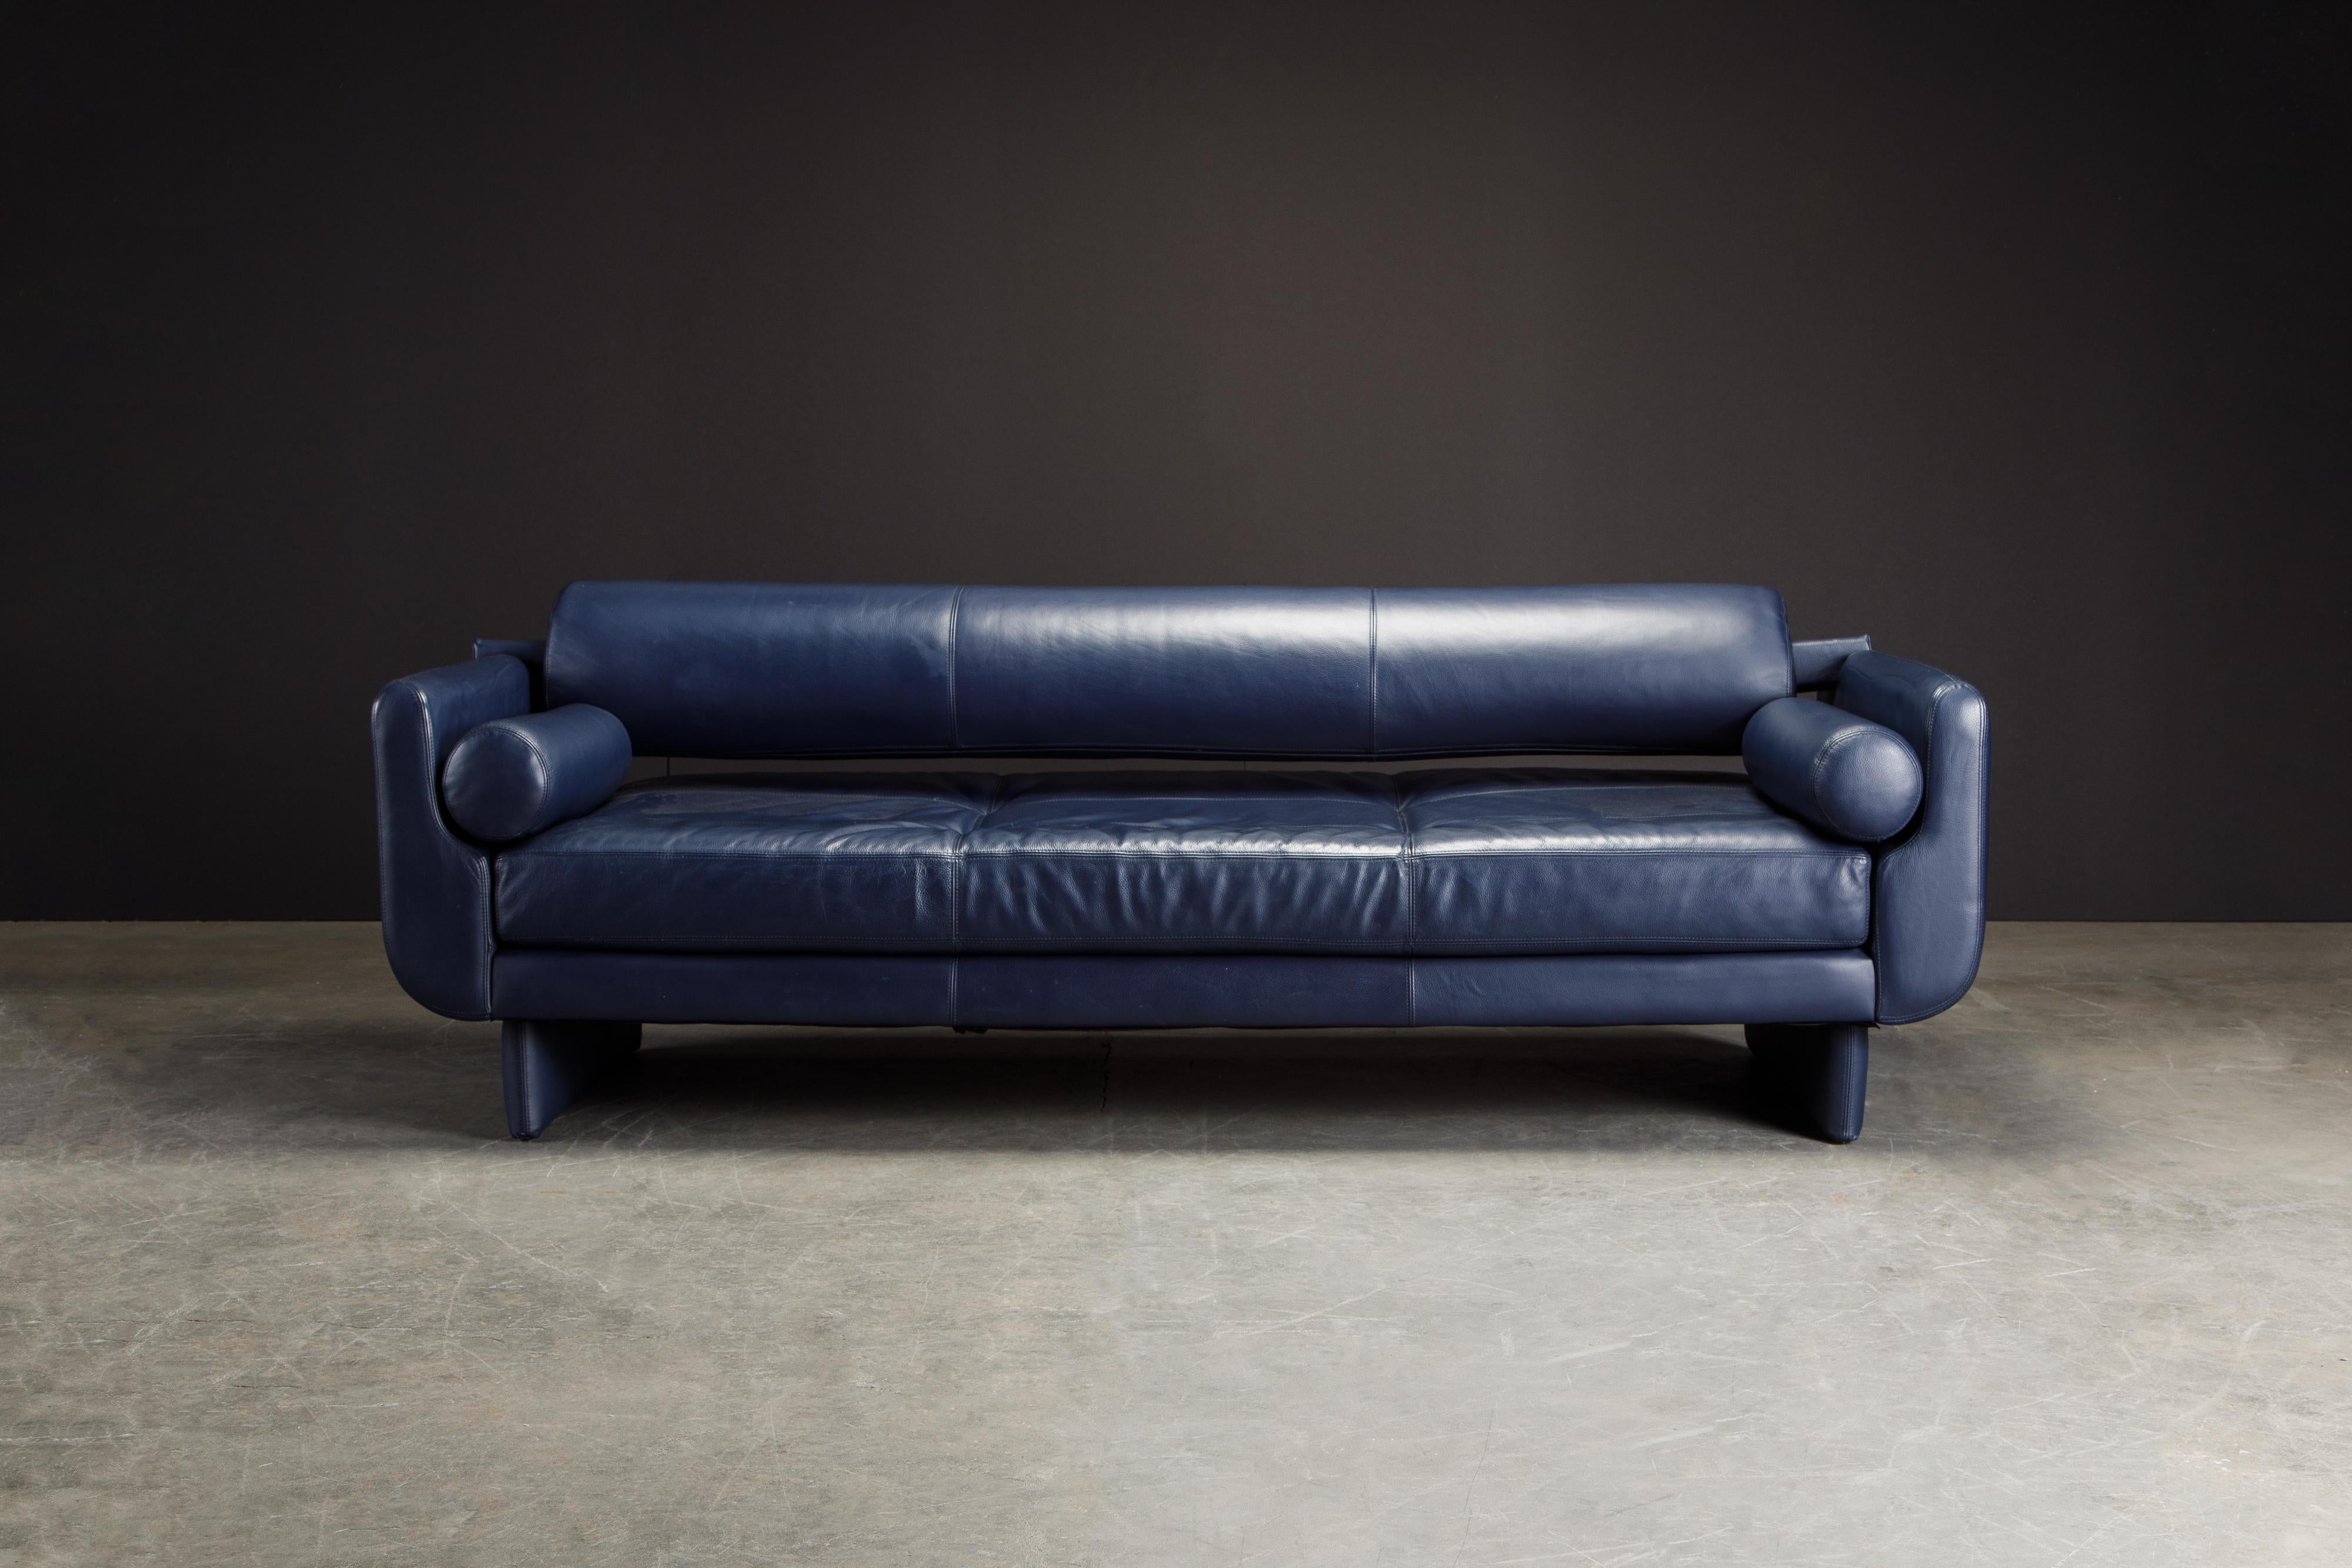 The blue leather on this Vladimir Kagan for American leather Postmodern 'Matinee' convertible sofa / daybed is absolutely to die for. Beautiful color and light patina throughout, featuring high quality leather that Vladimir Kagan and American